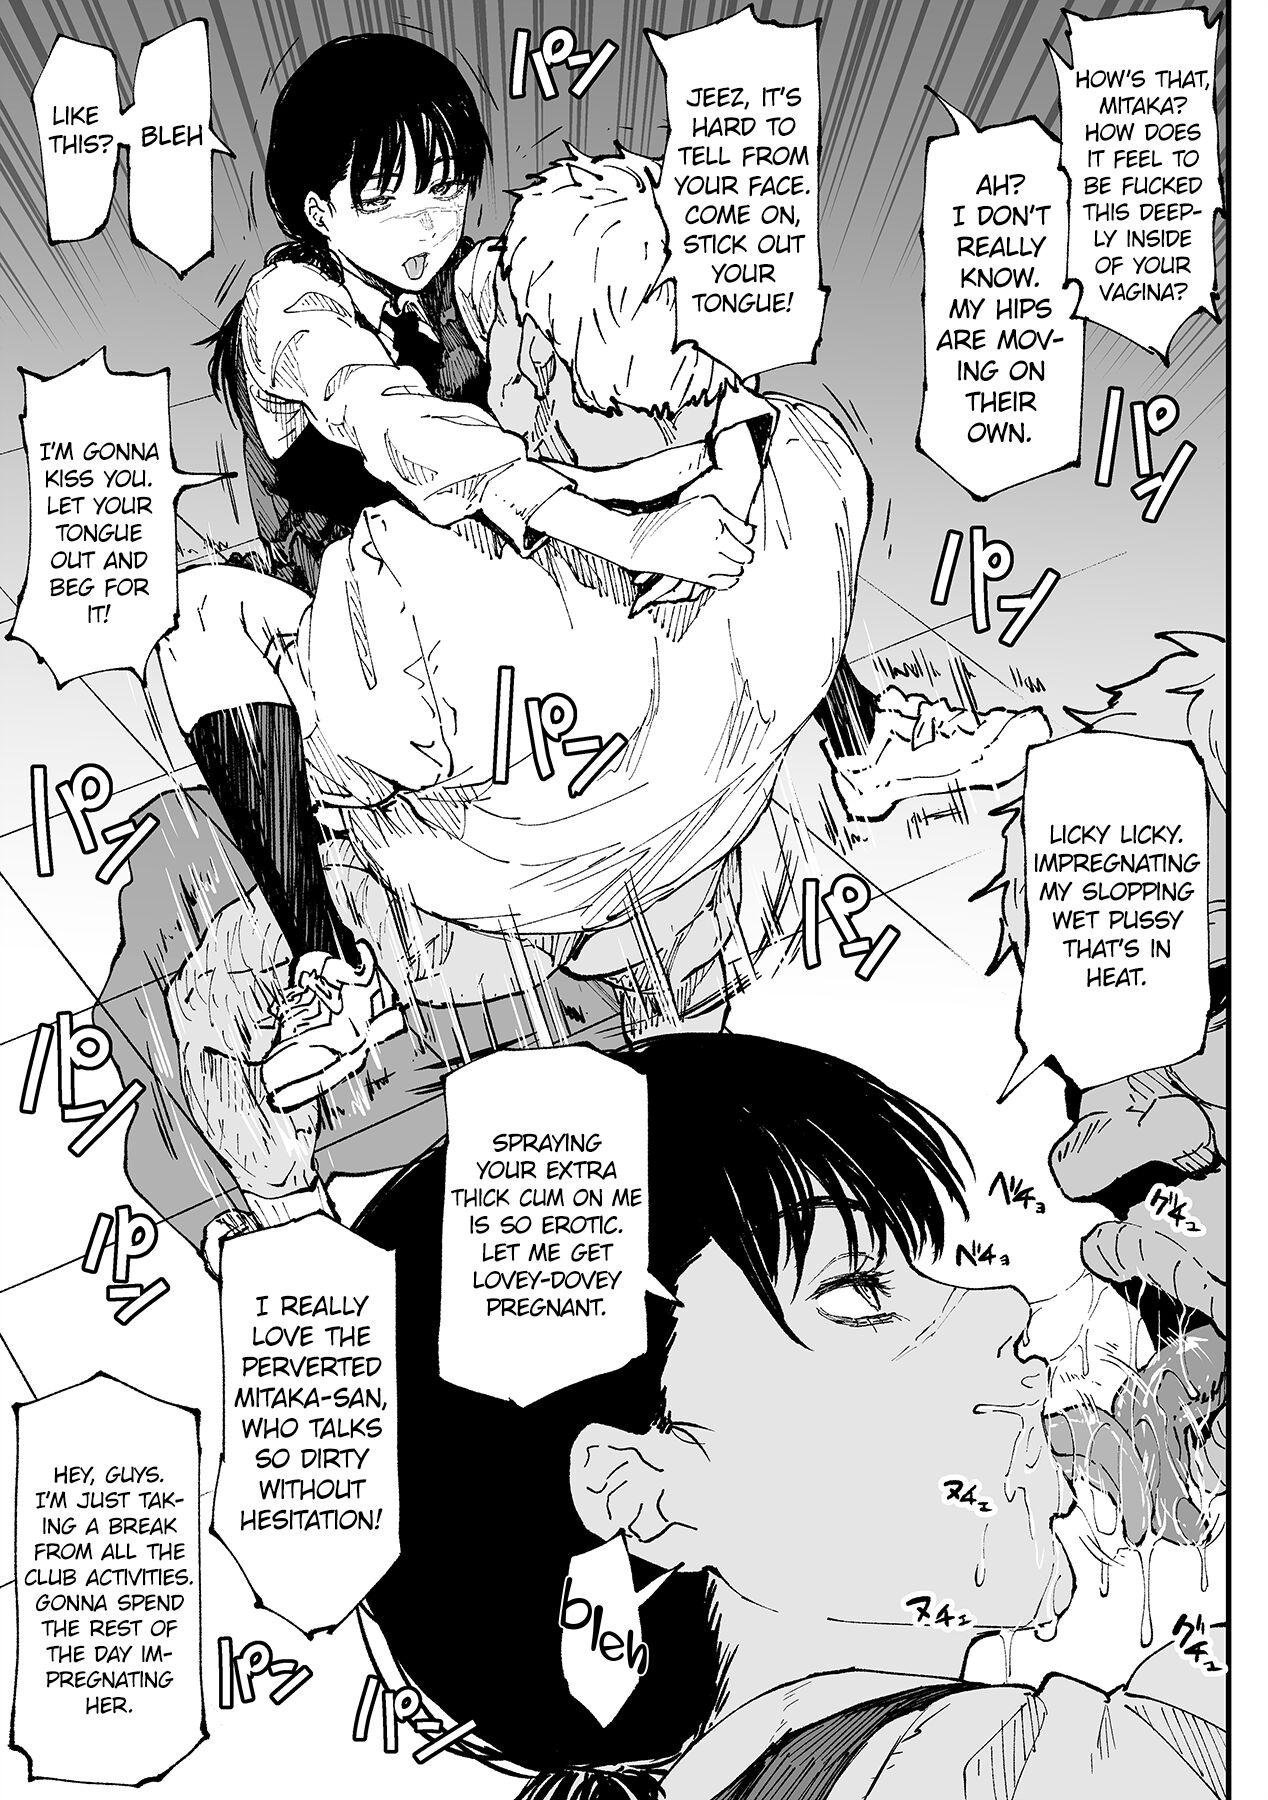 Gym Mitaka-san Does Her Best to Make you Hers - Chainsaw man Family - Page 4